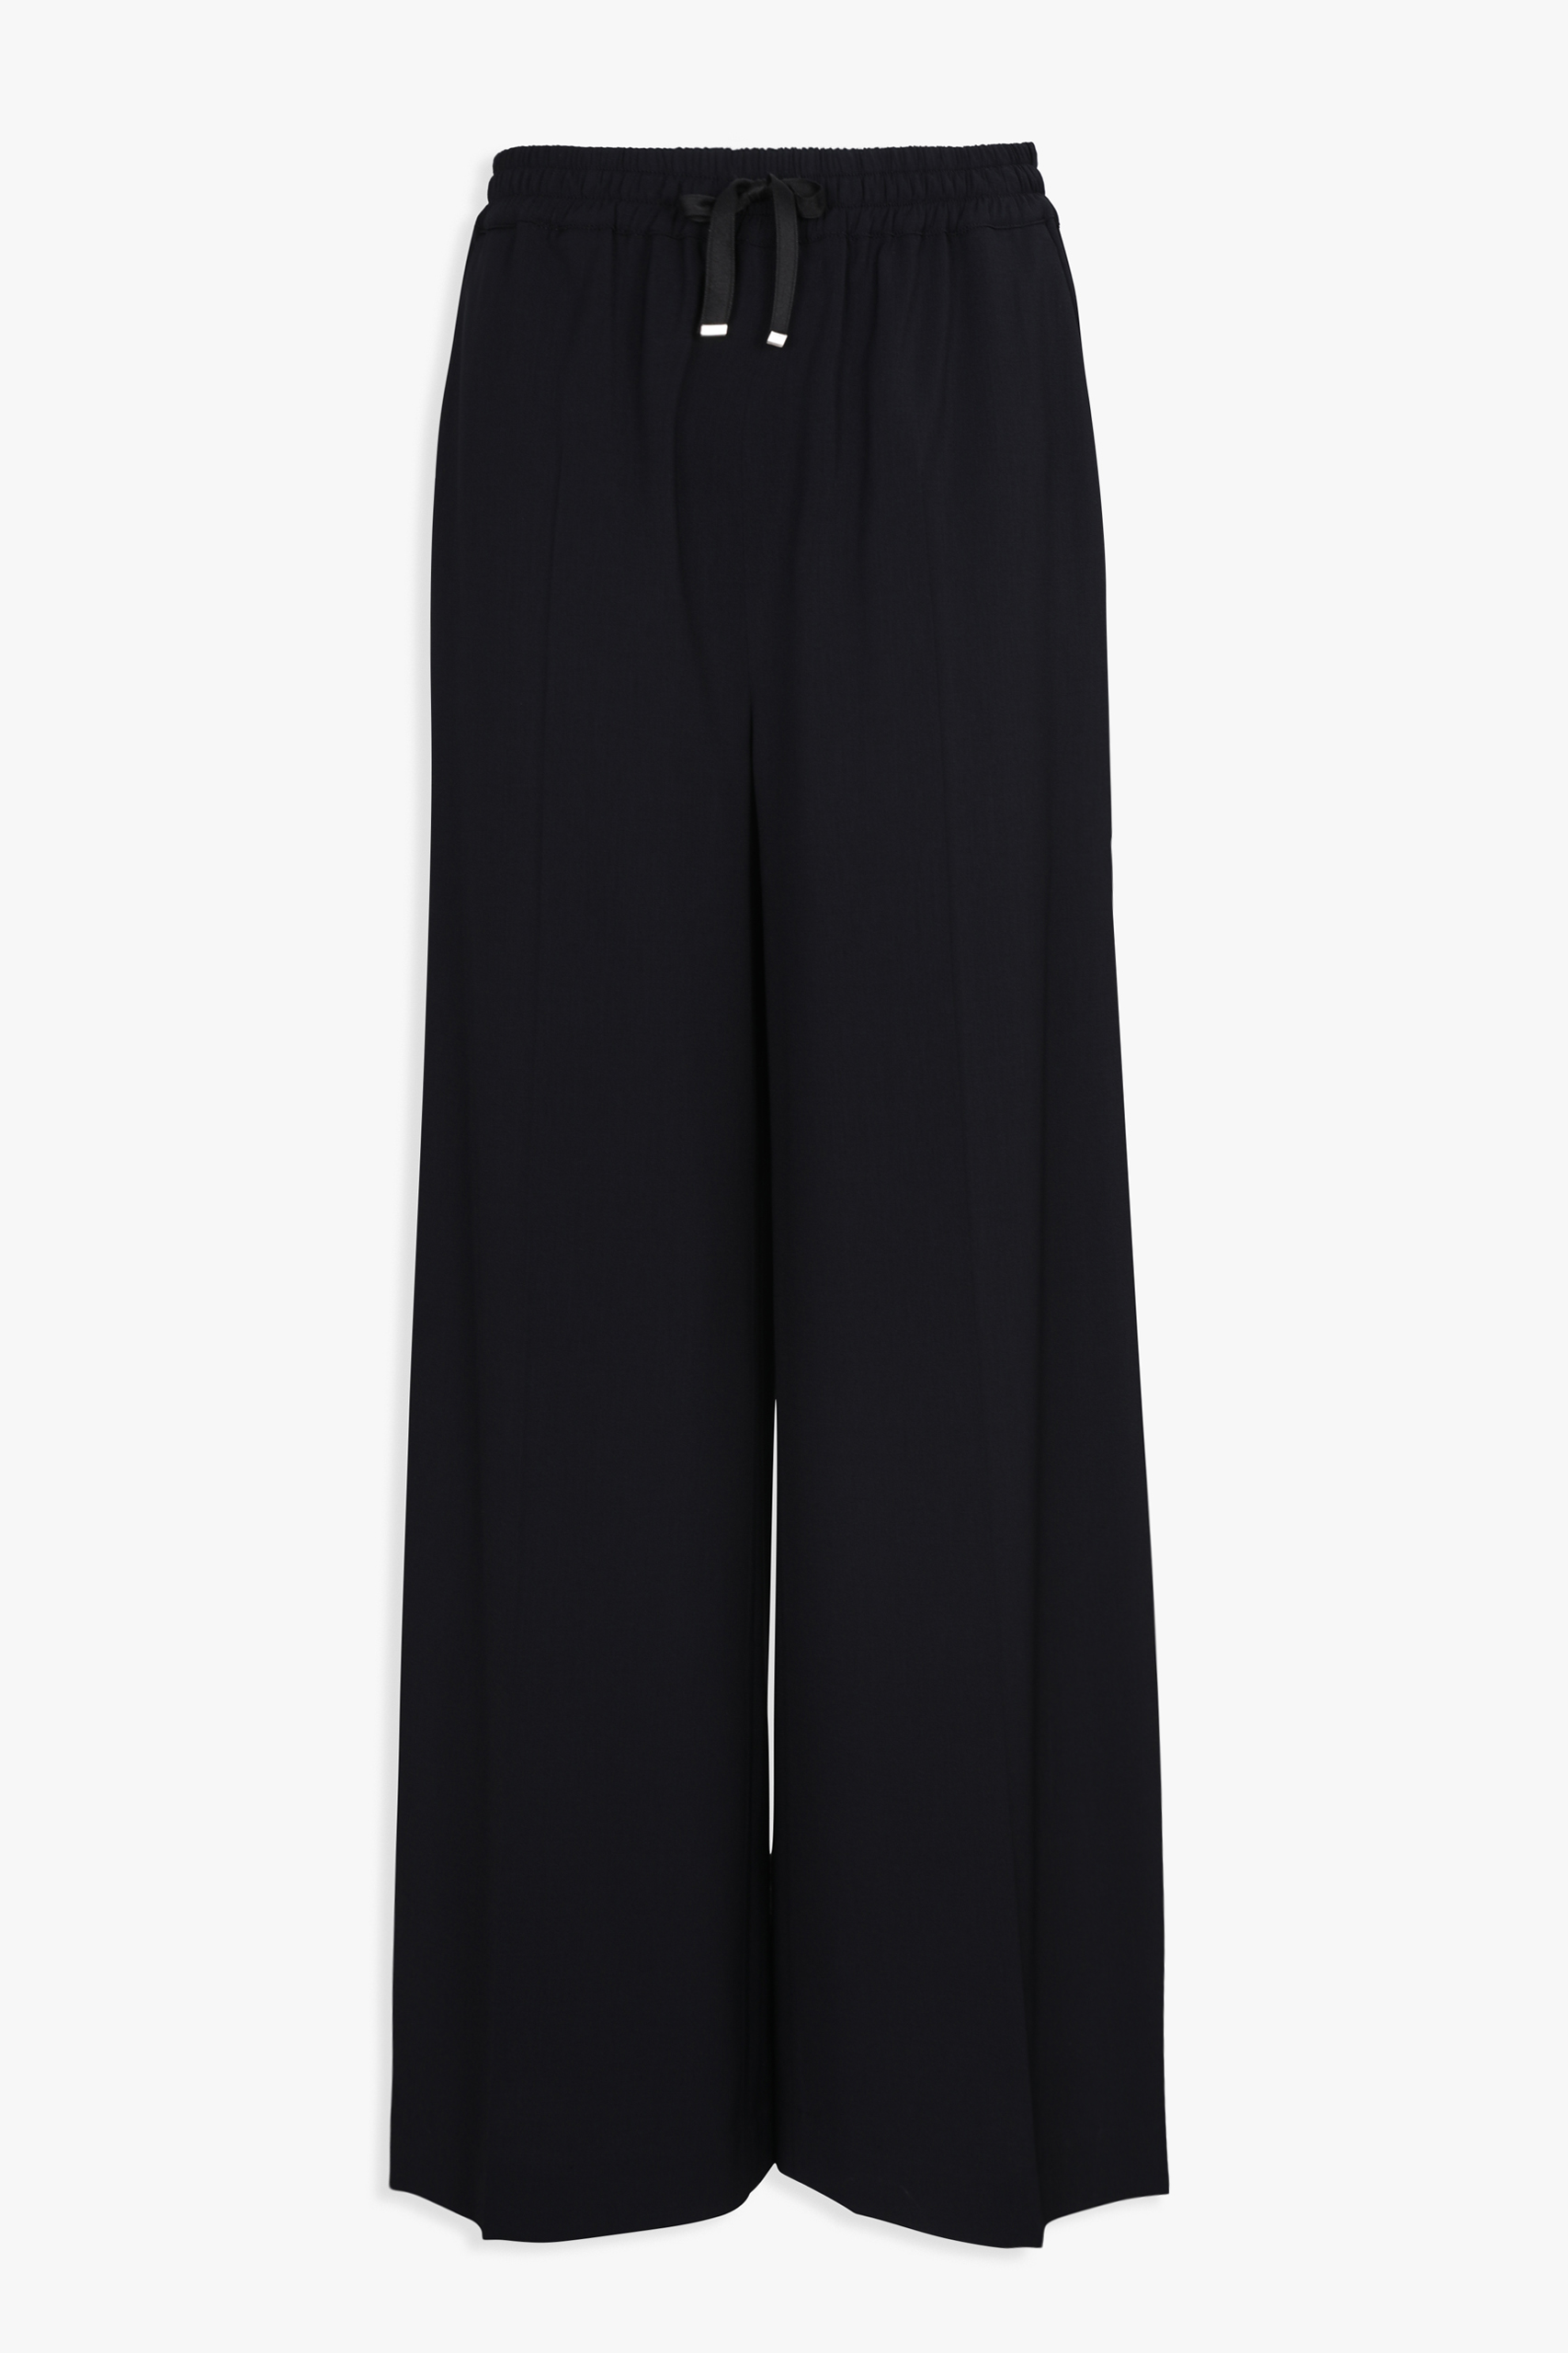 HIGH QUALITY LINE - STRAIGHT TRACK PANTS (NAVY)